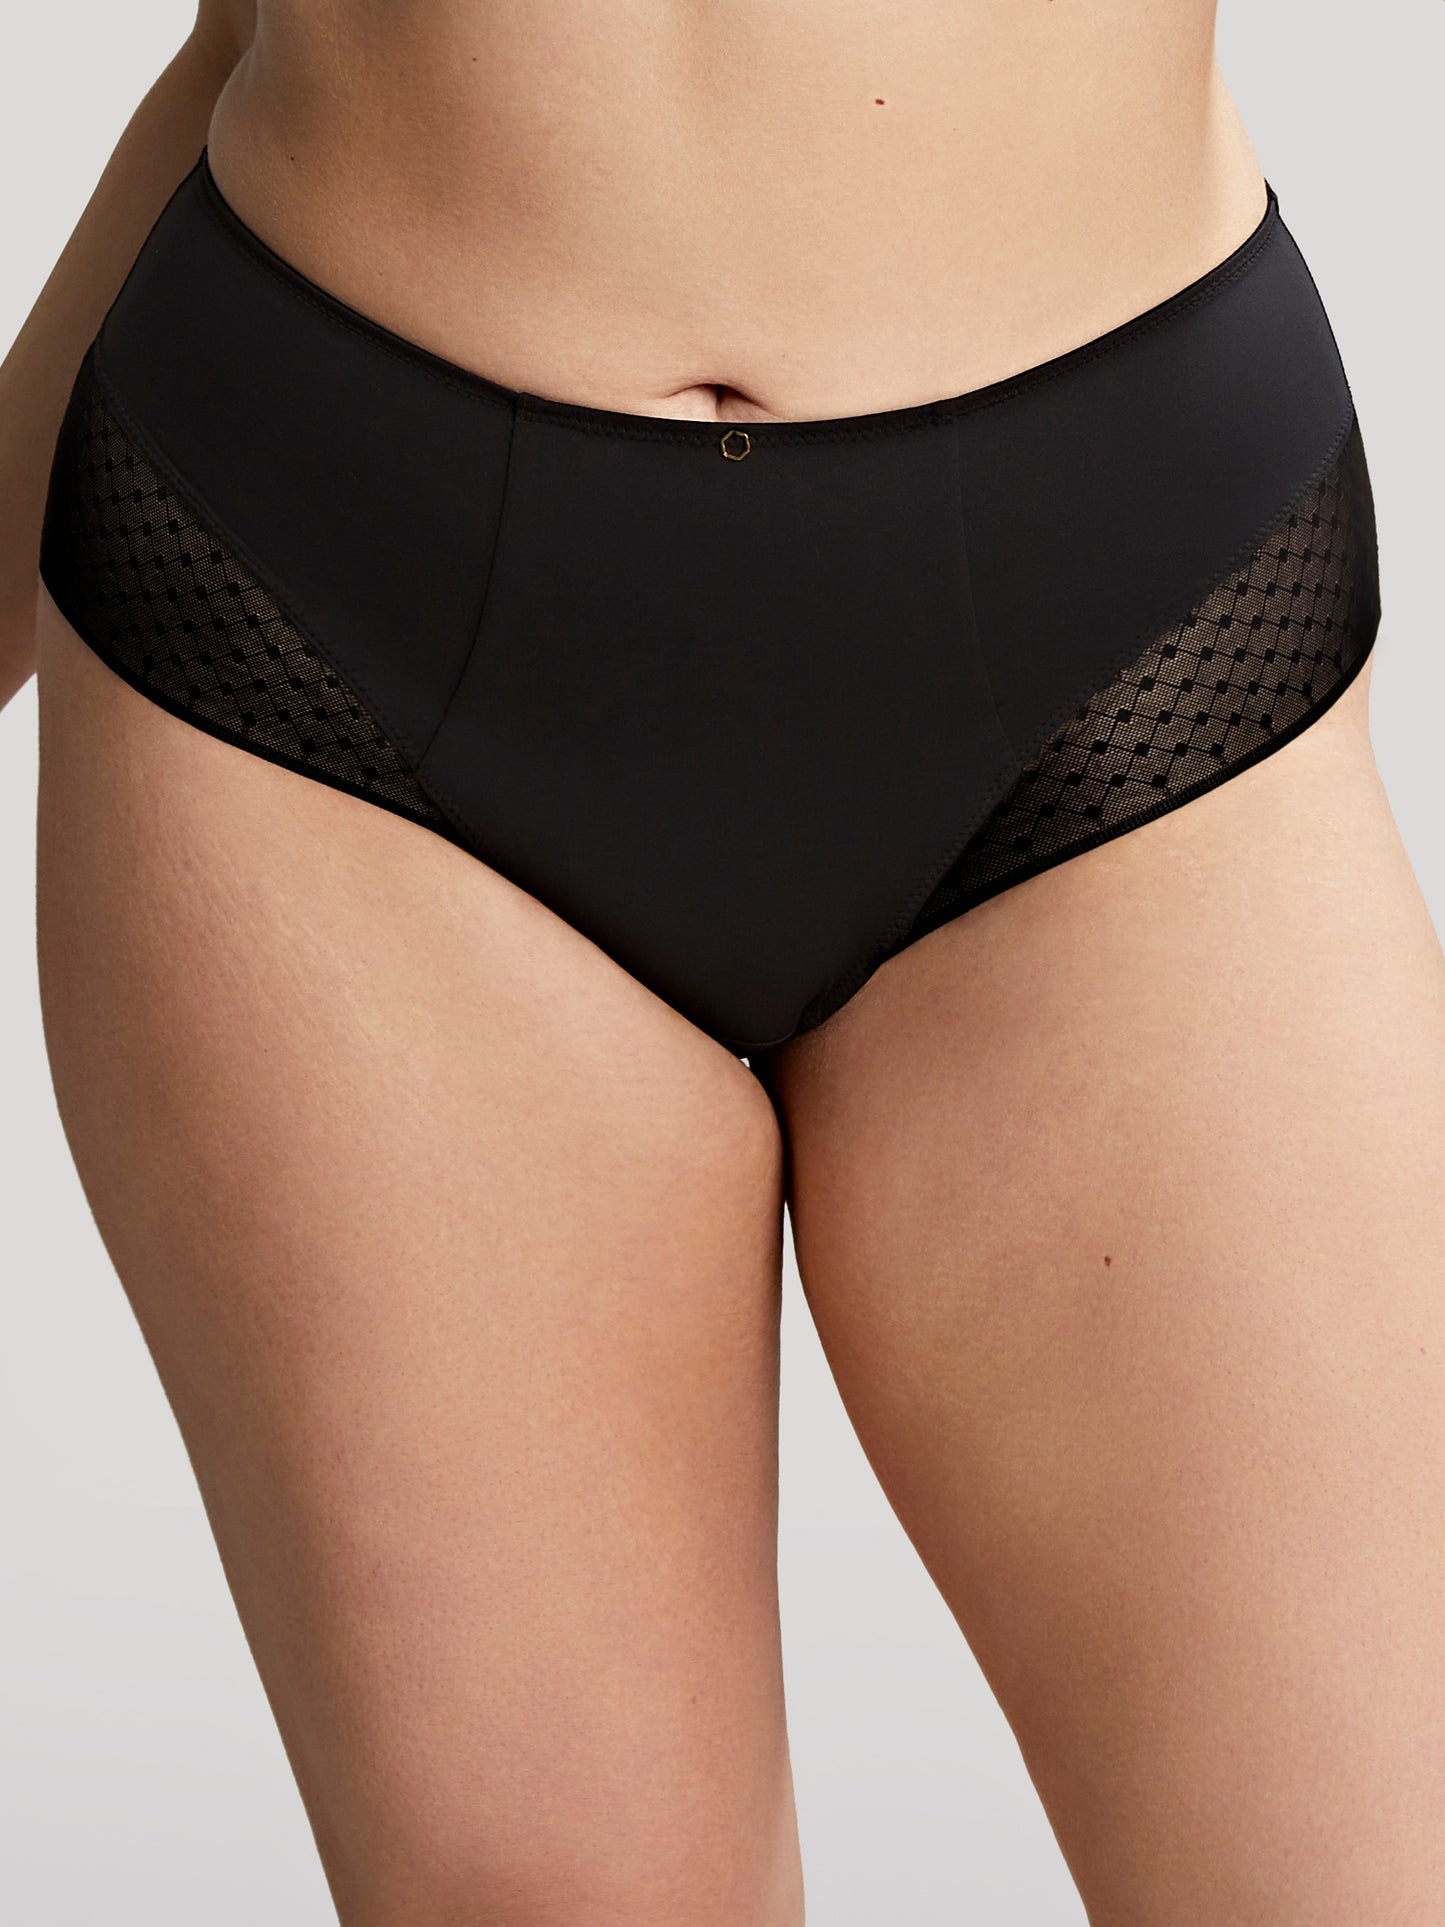 Bliss Deep Brief - Noir worn by model front view